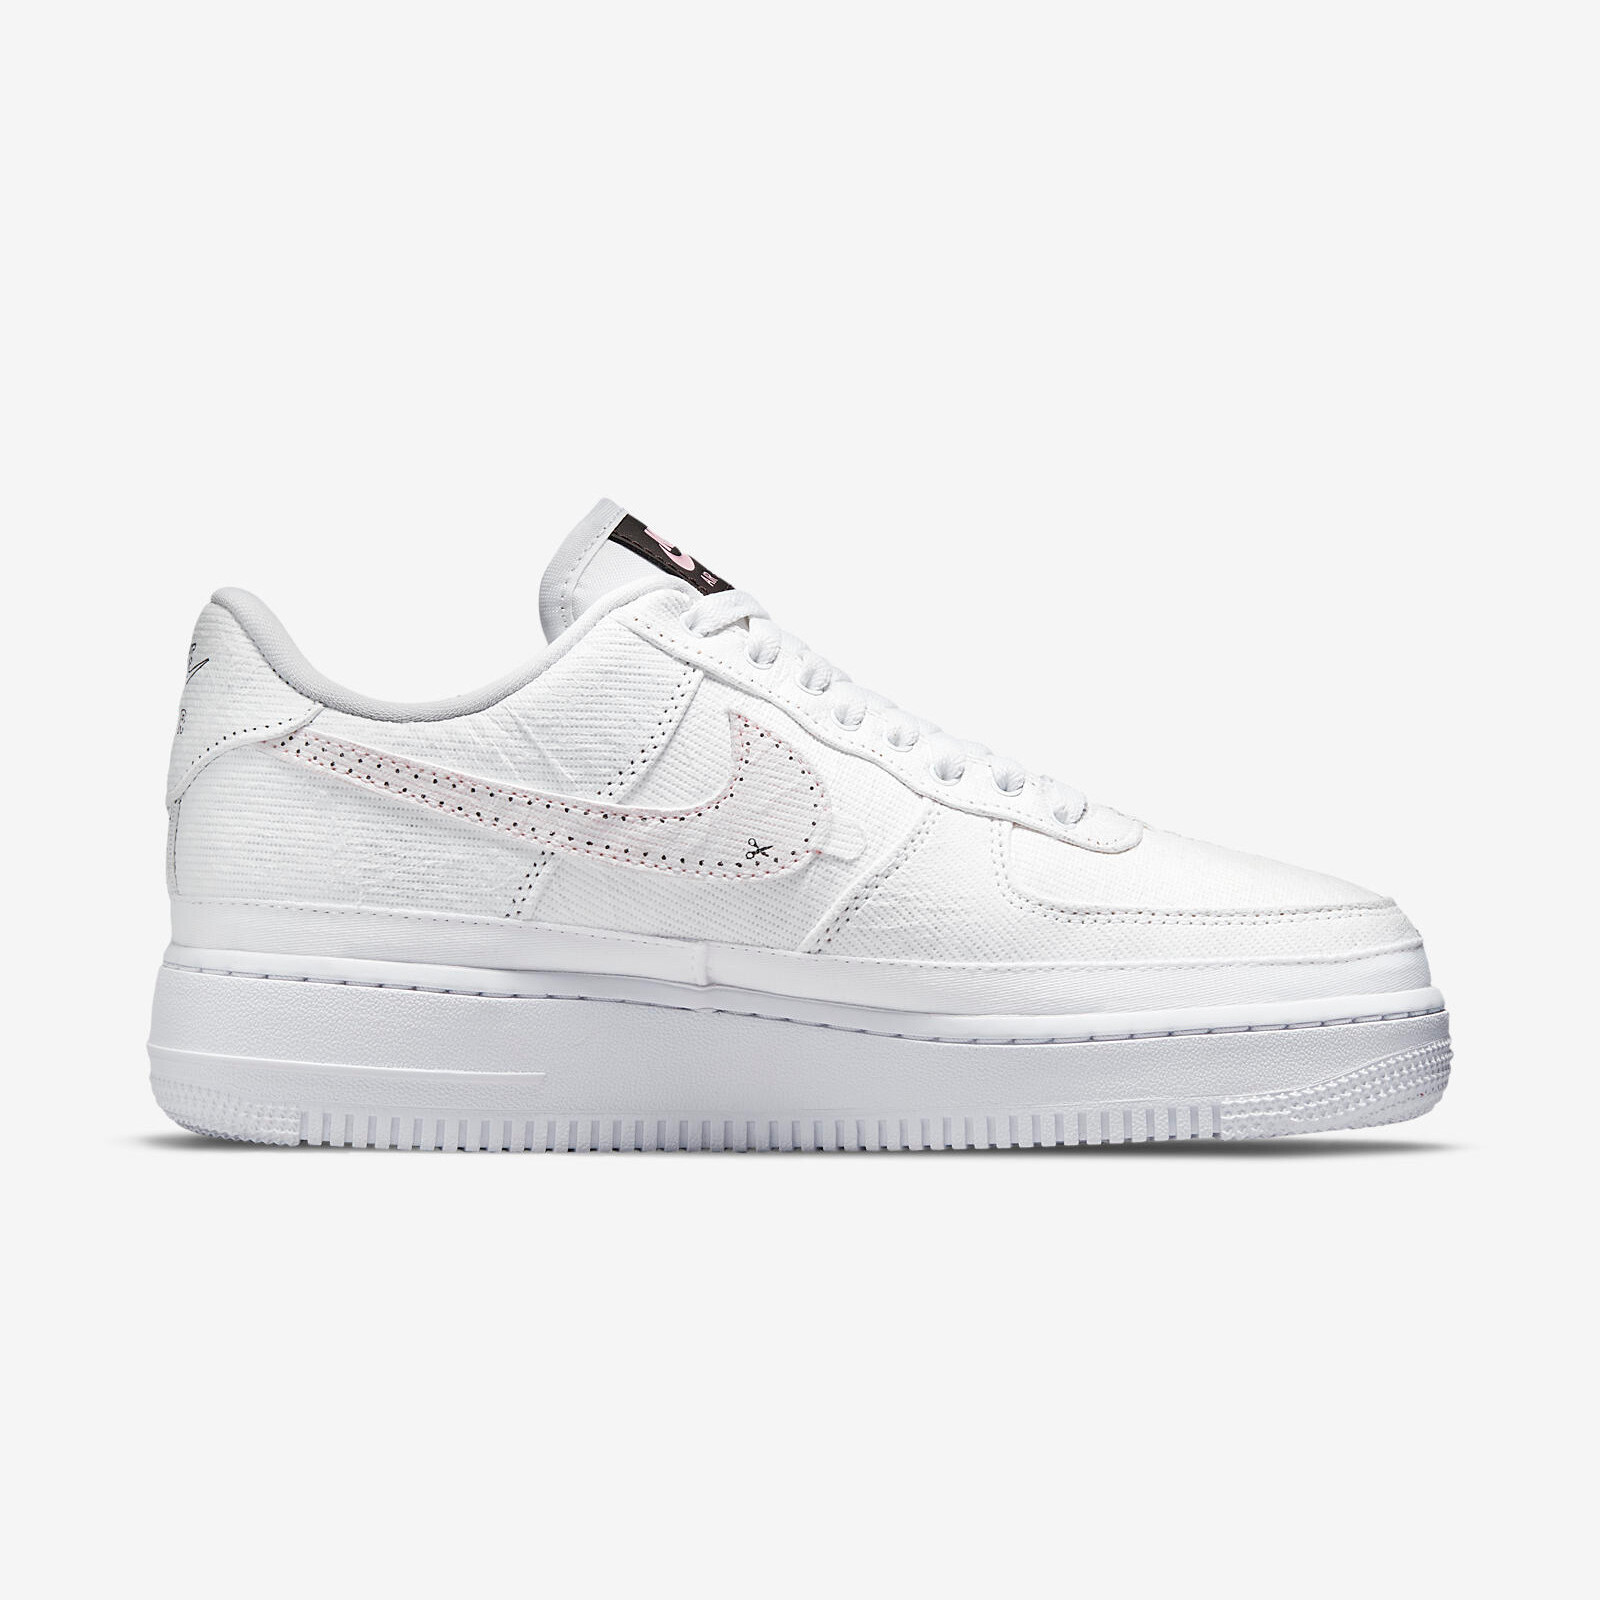 Nike Air Force 1
« Texture Reveal »